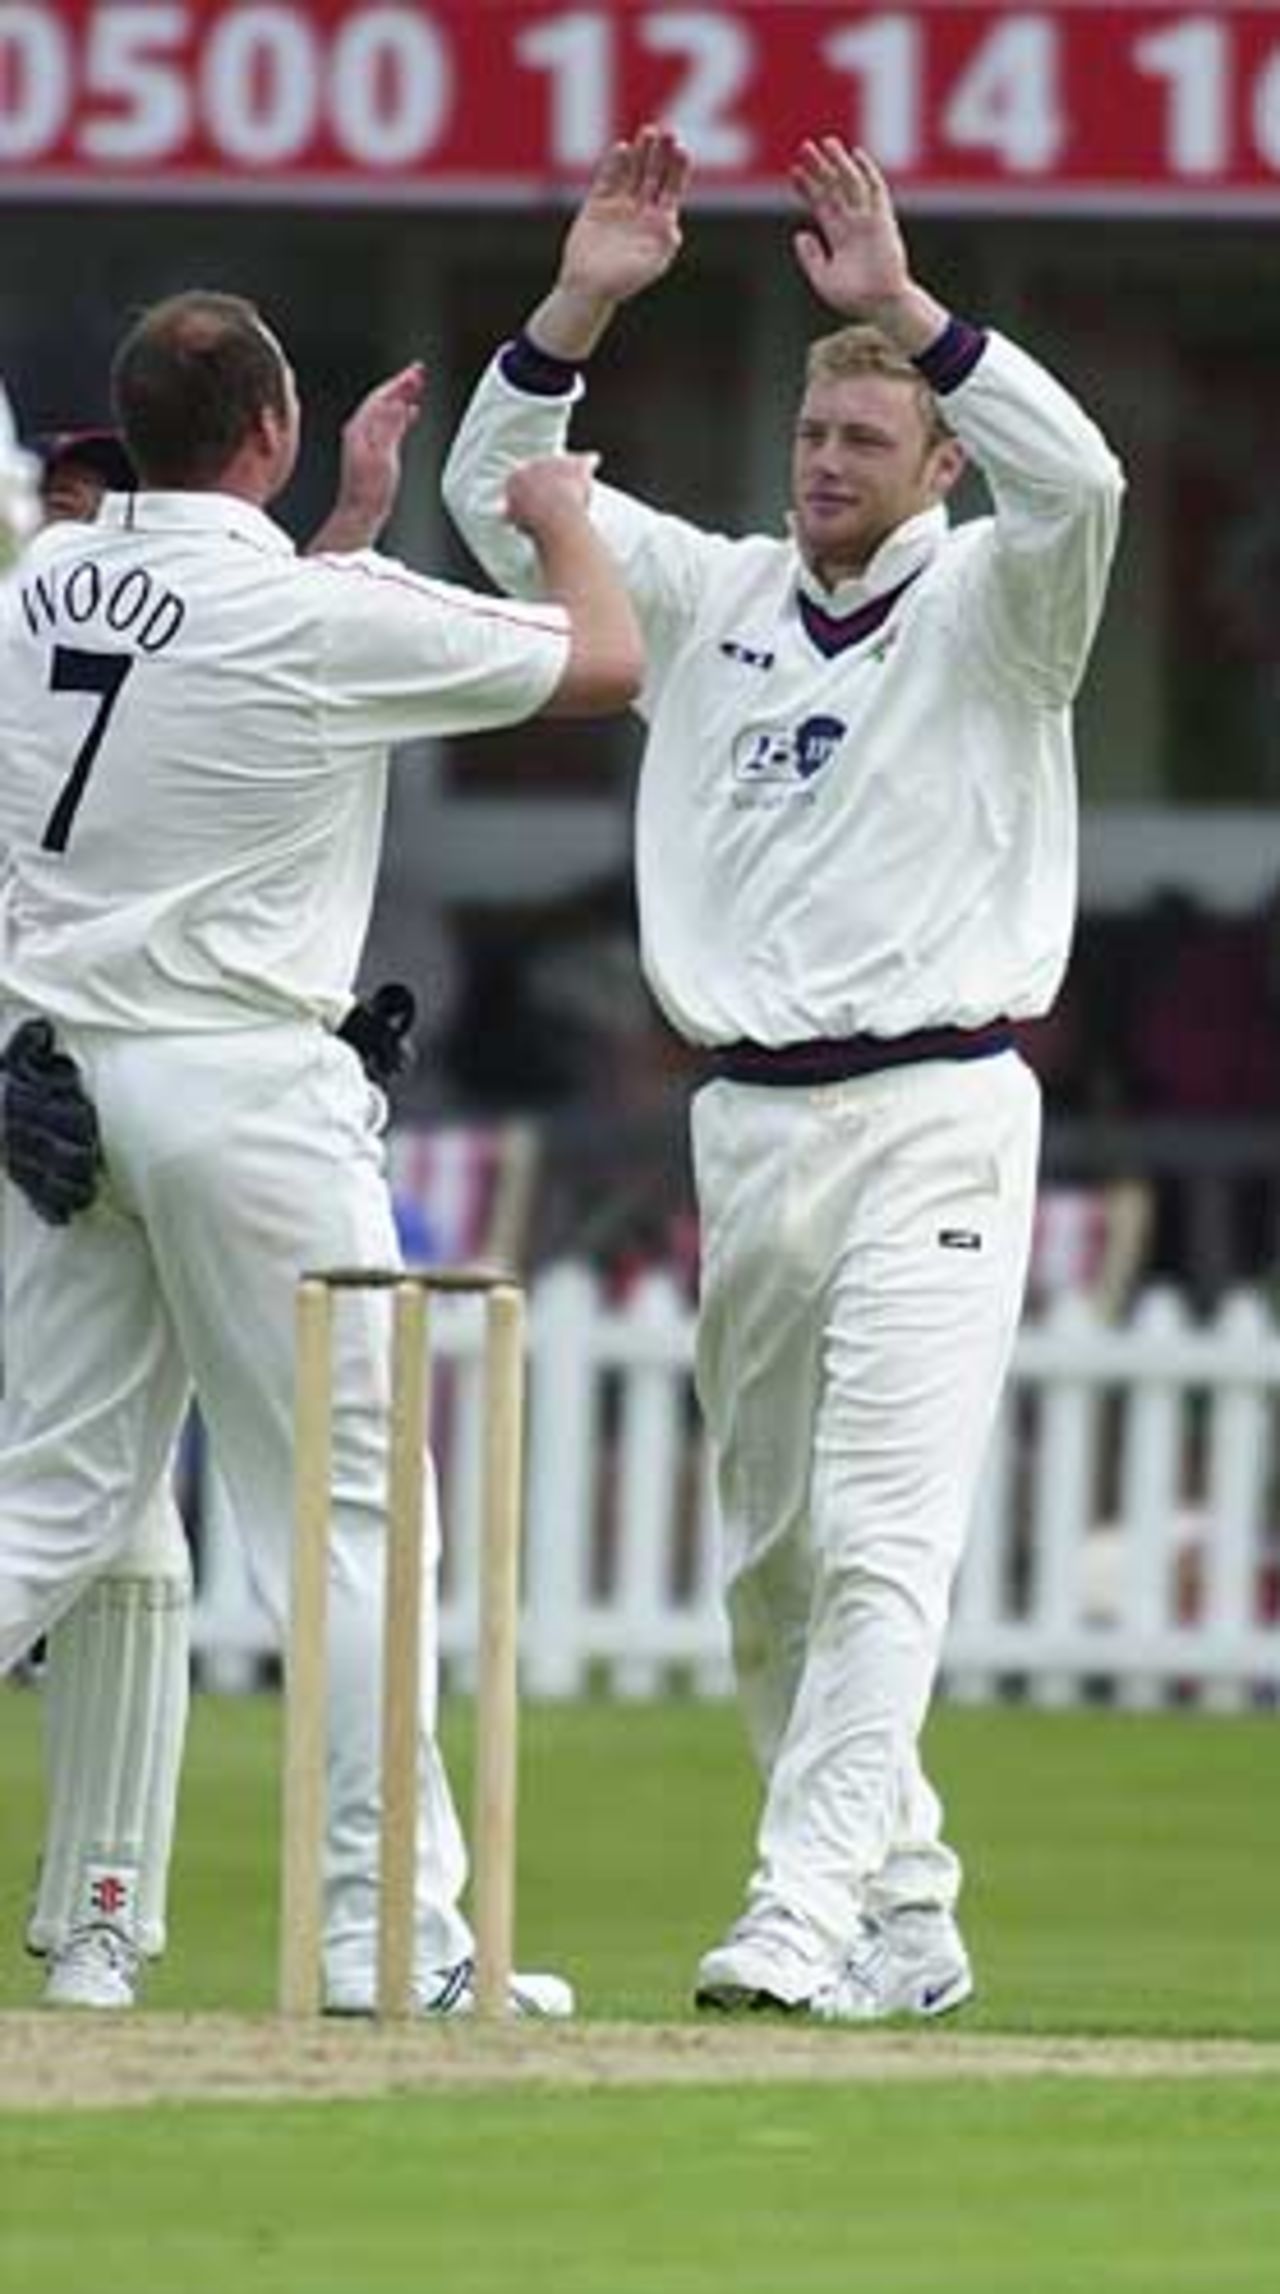 Bowler Wood and slip Flintoff have combined to dismiss  Stevens, Benson & Hedges Cup, May 22 at Leicester